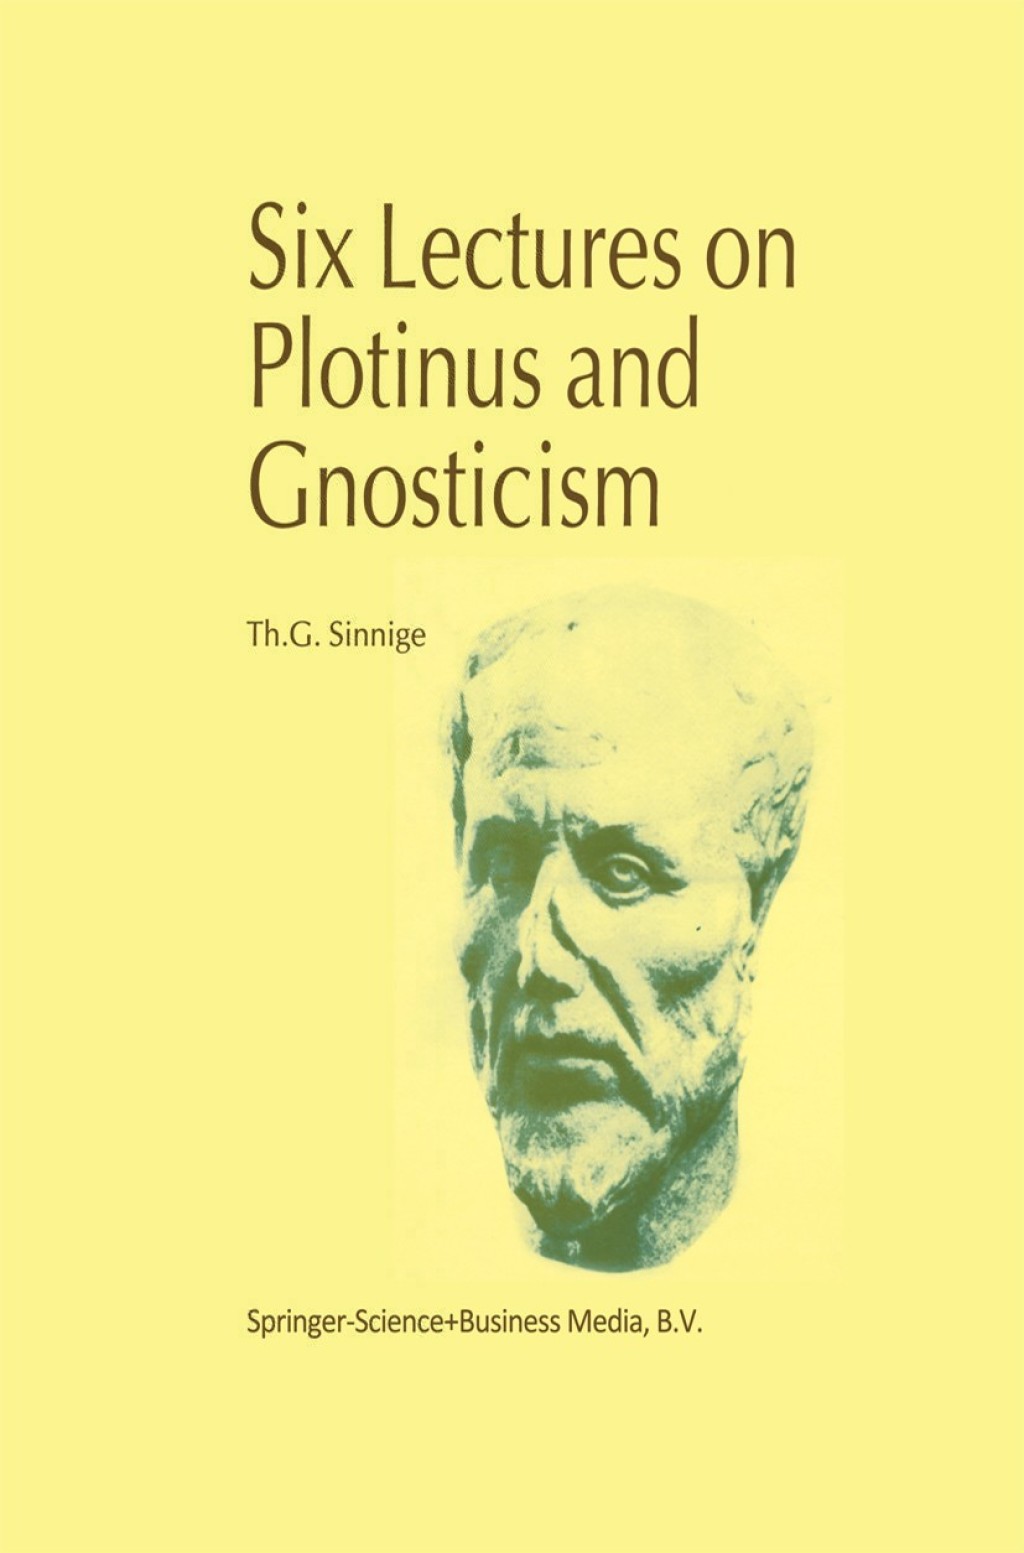 Six Lectures on Plotinus and Gnosticism (eBook) - Th.G. Sinnige